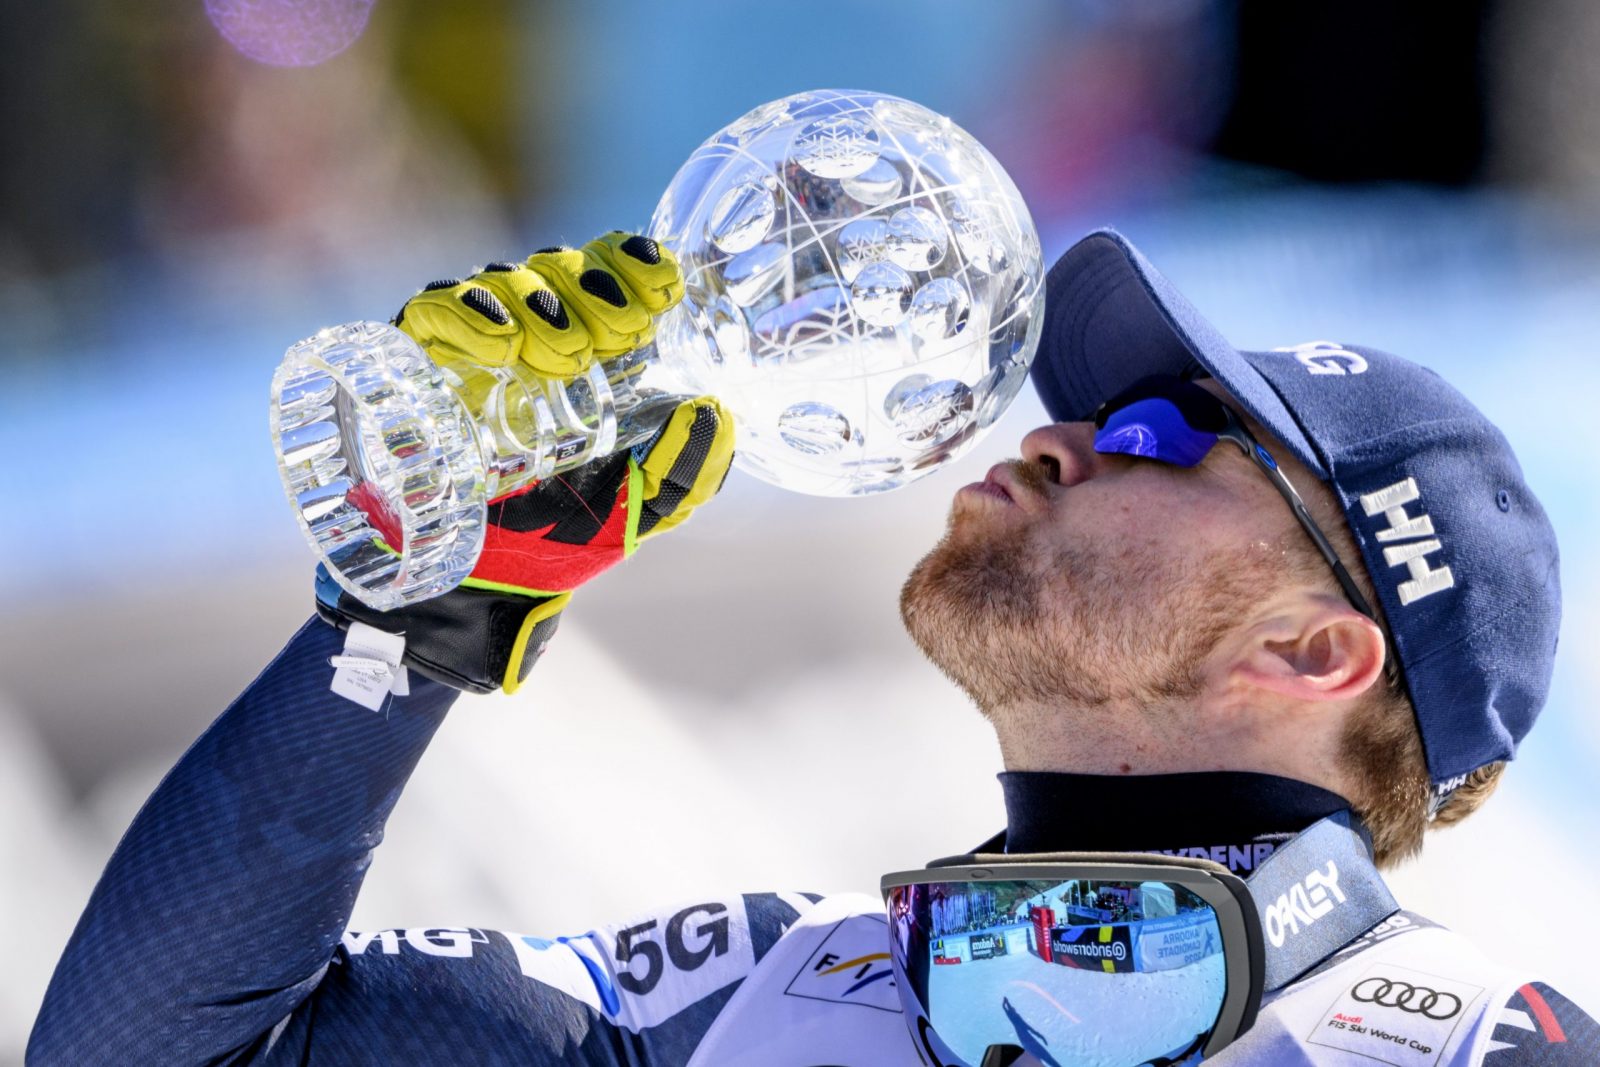 epa10523726 The Downhill World Cup winner Aleksander Aamodt Kilde of Norway kisses his trophy after the Men's Downhill race at the FIS Alpine Skiing World Cup finals in the skiing resort of El Tarter, Andorra, 15 March 2023.  EPA/JEAN-CHRISTOPHE BOTT